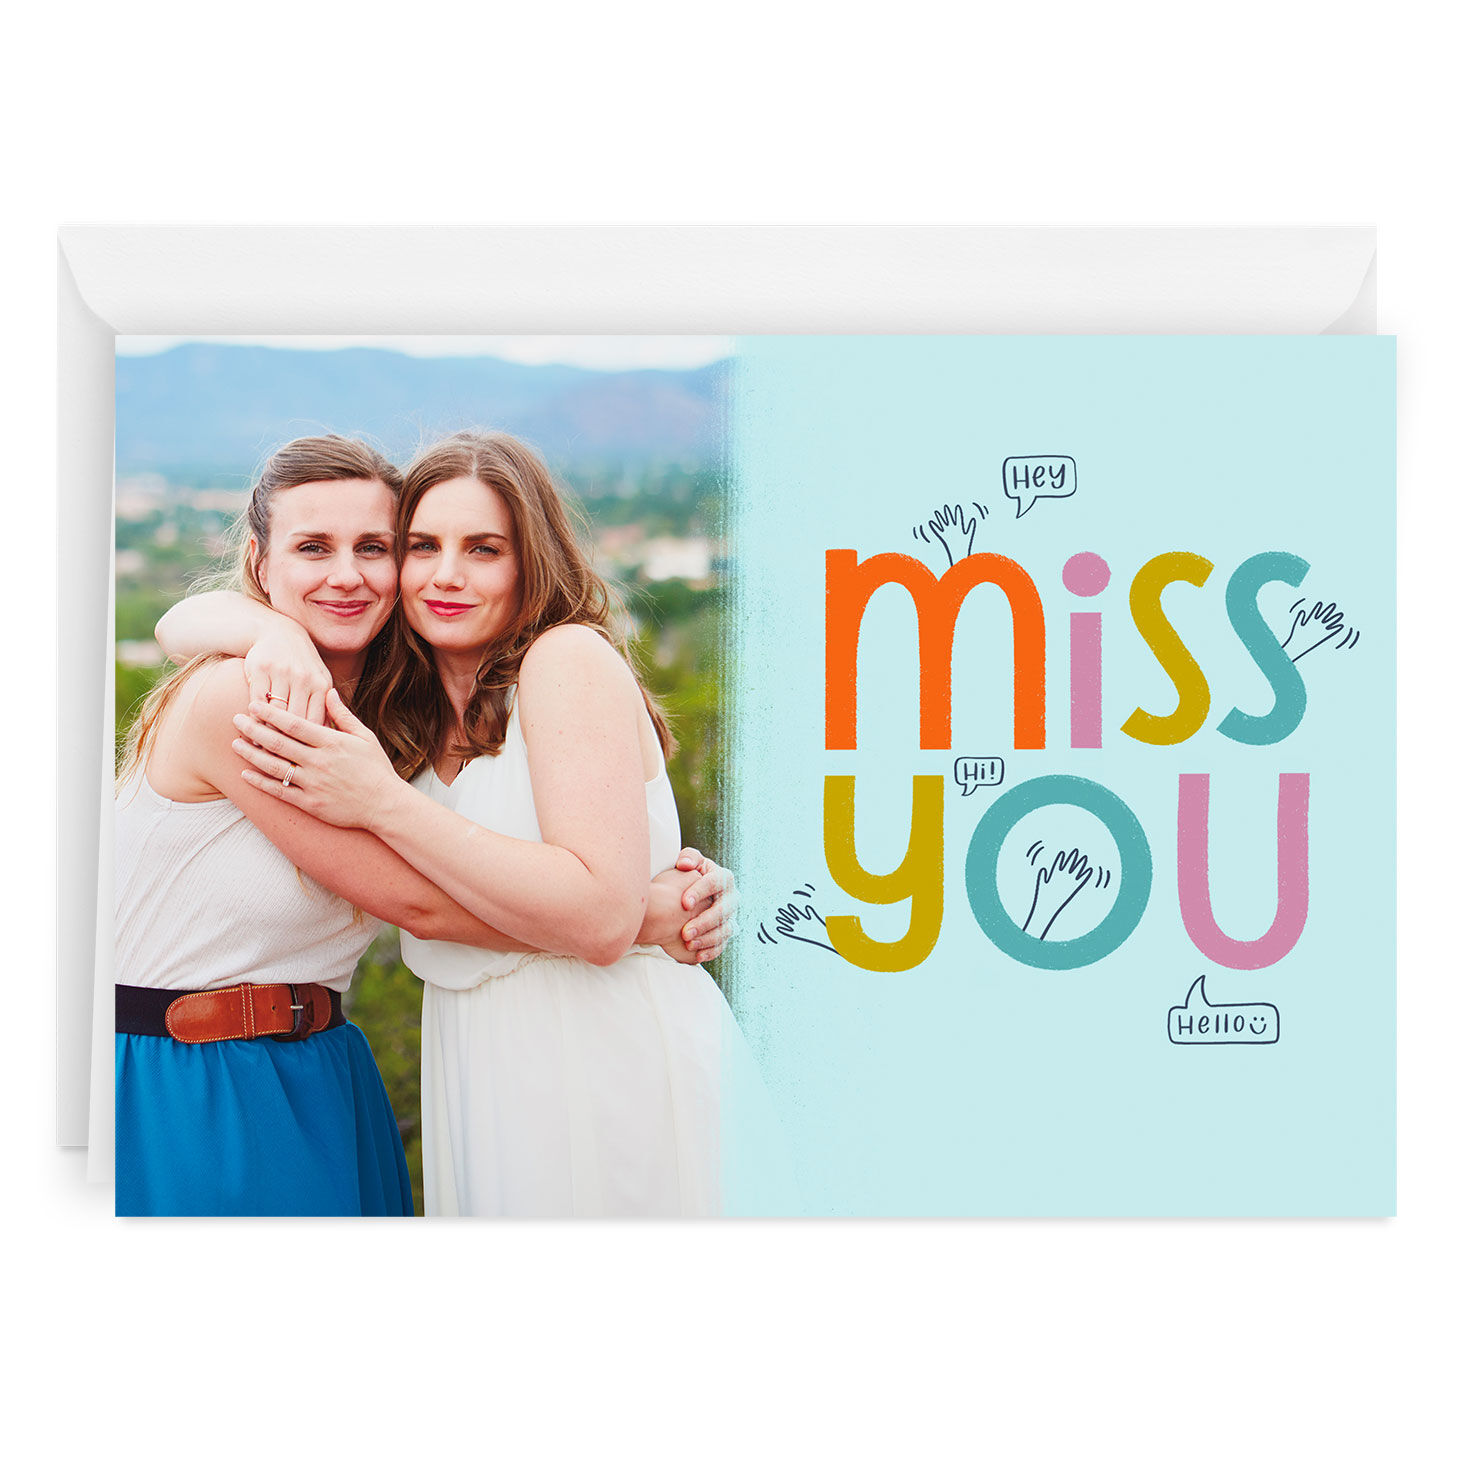 Personalized Miss You Photo Card for only USD 4.99 | Hallmark